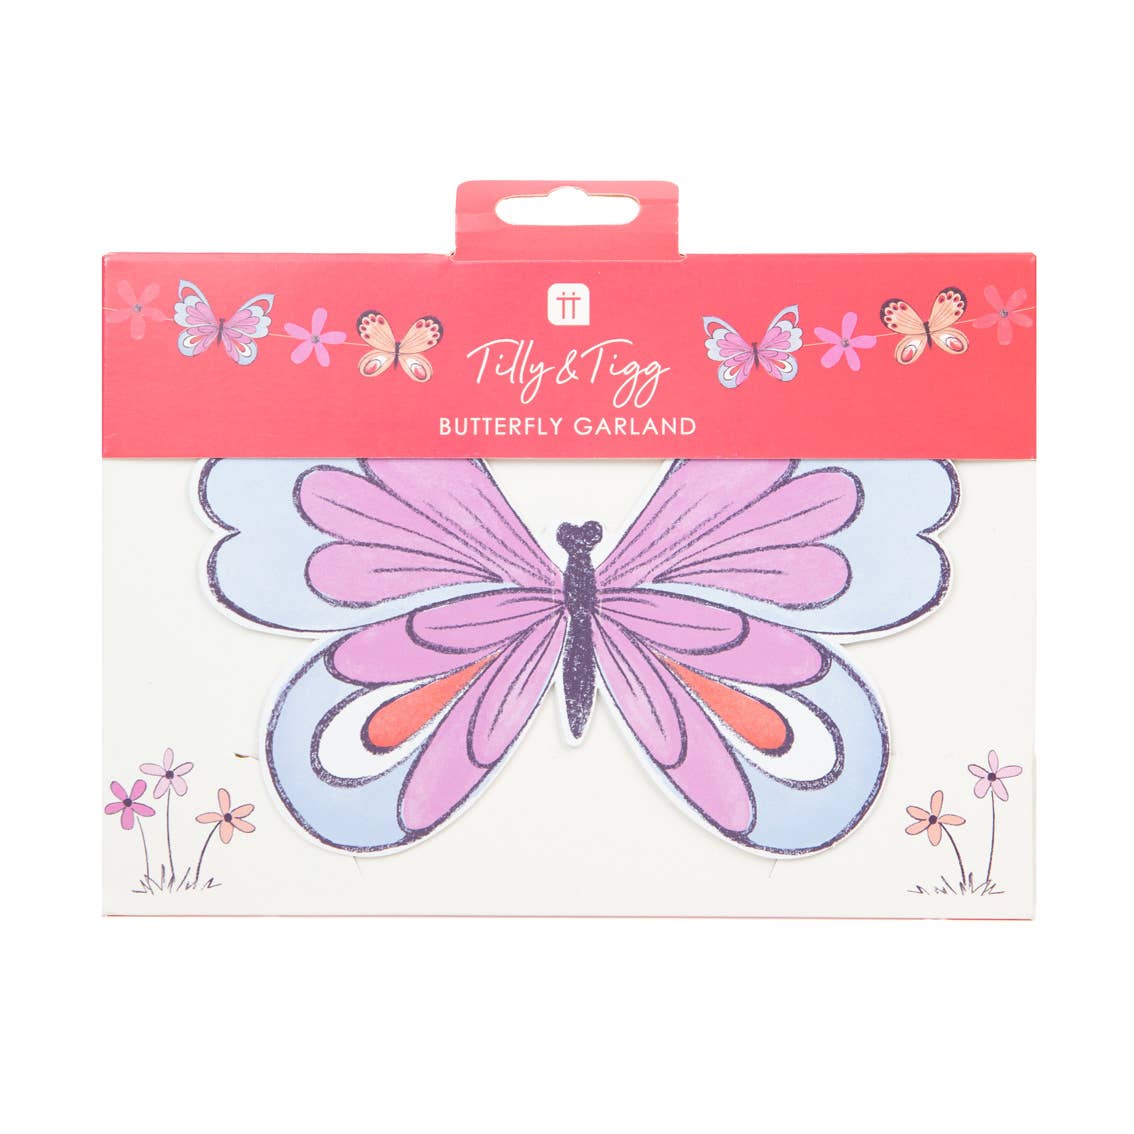 Tilly & Tigg Butterfly Bunting - 11.5ft